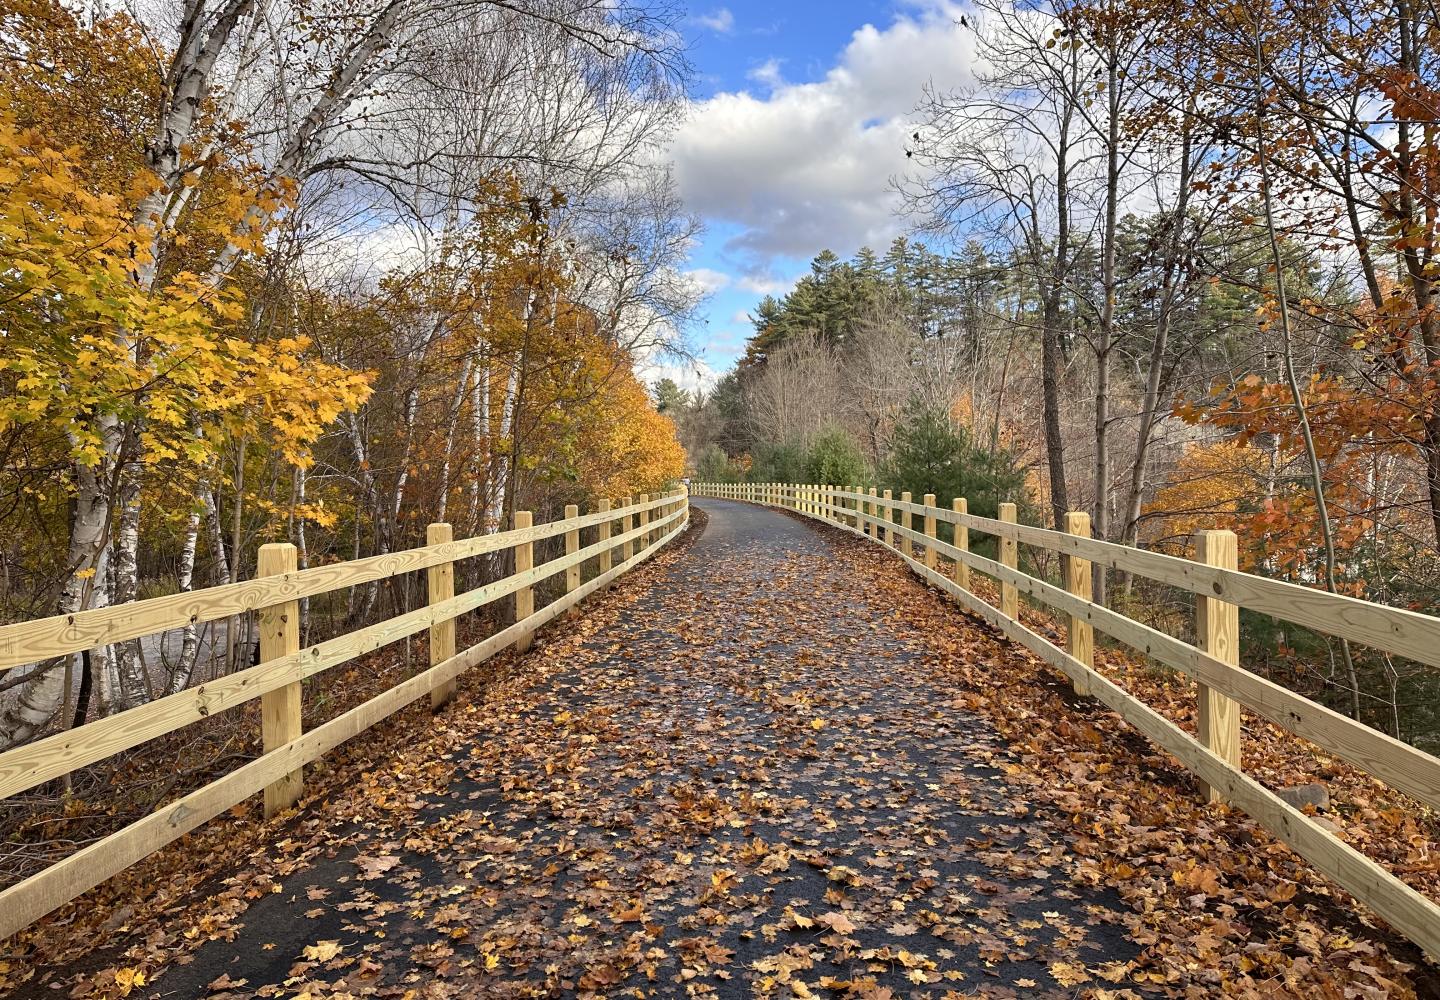 A paved section of the Adirondack Rail Trail through the Village of Saranac Lake.